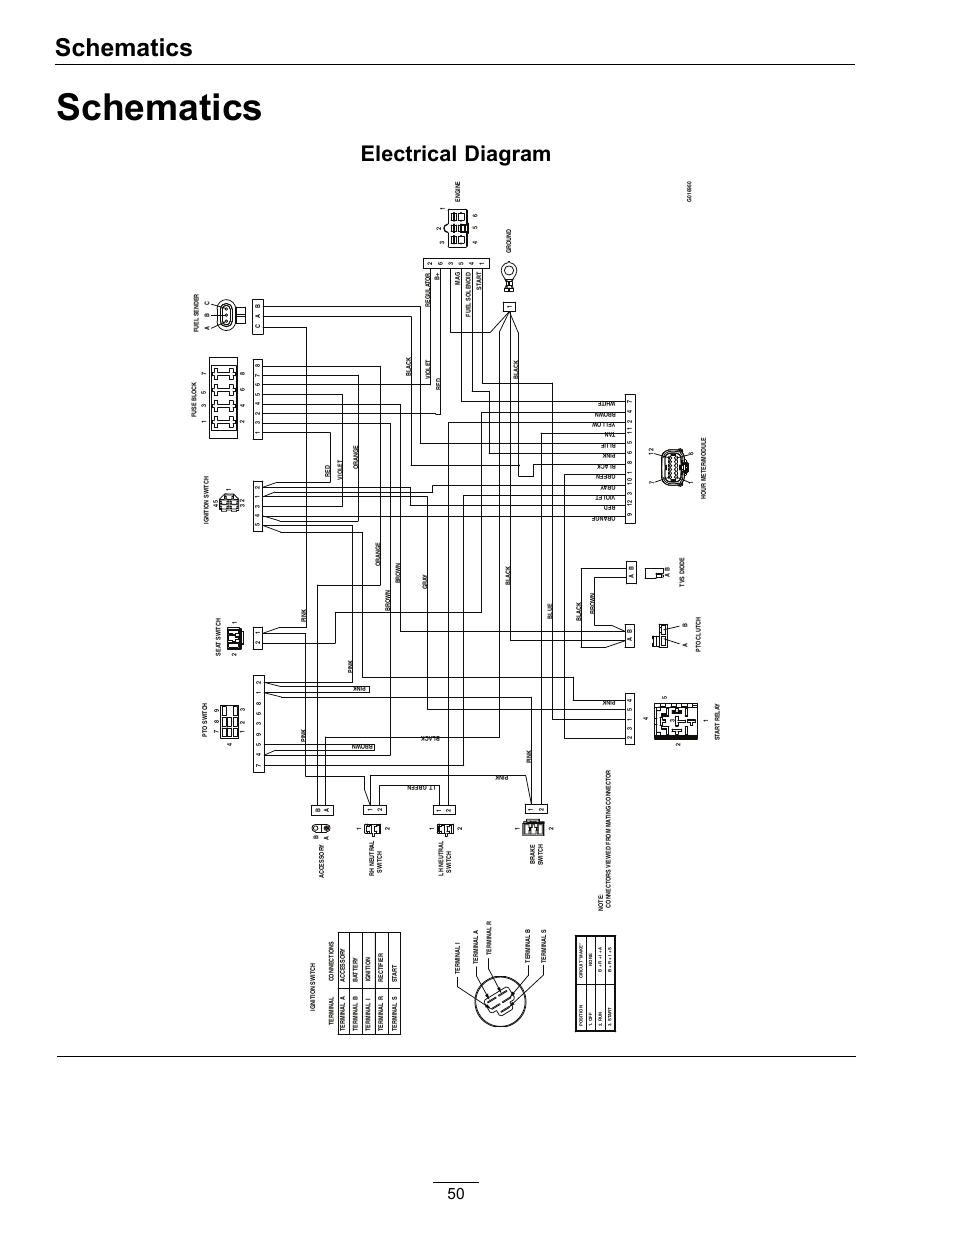 texas special telecaster pickups wiring diagram